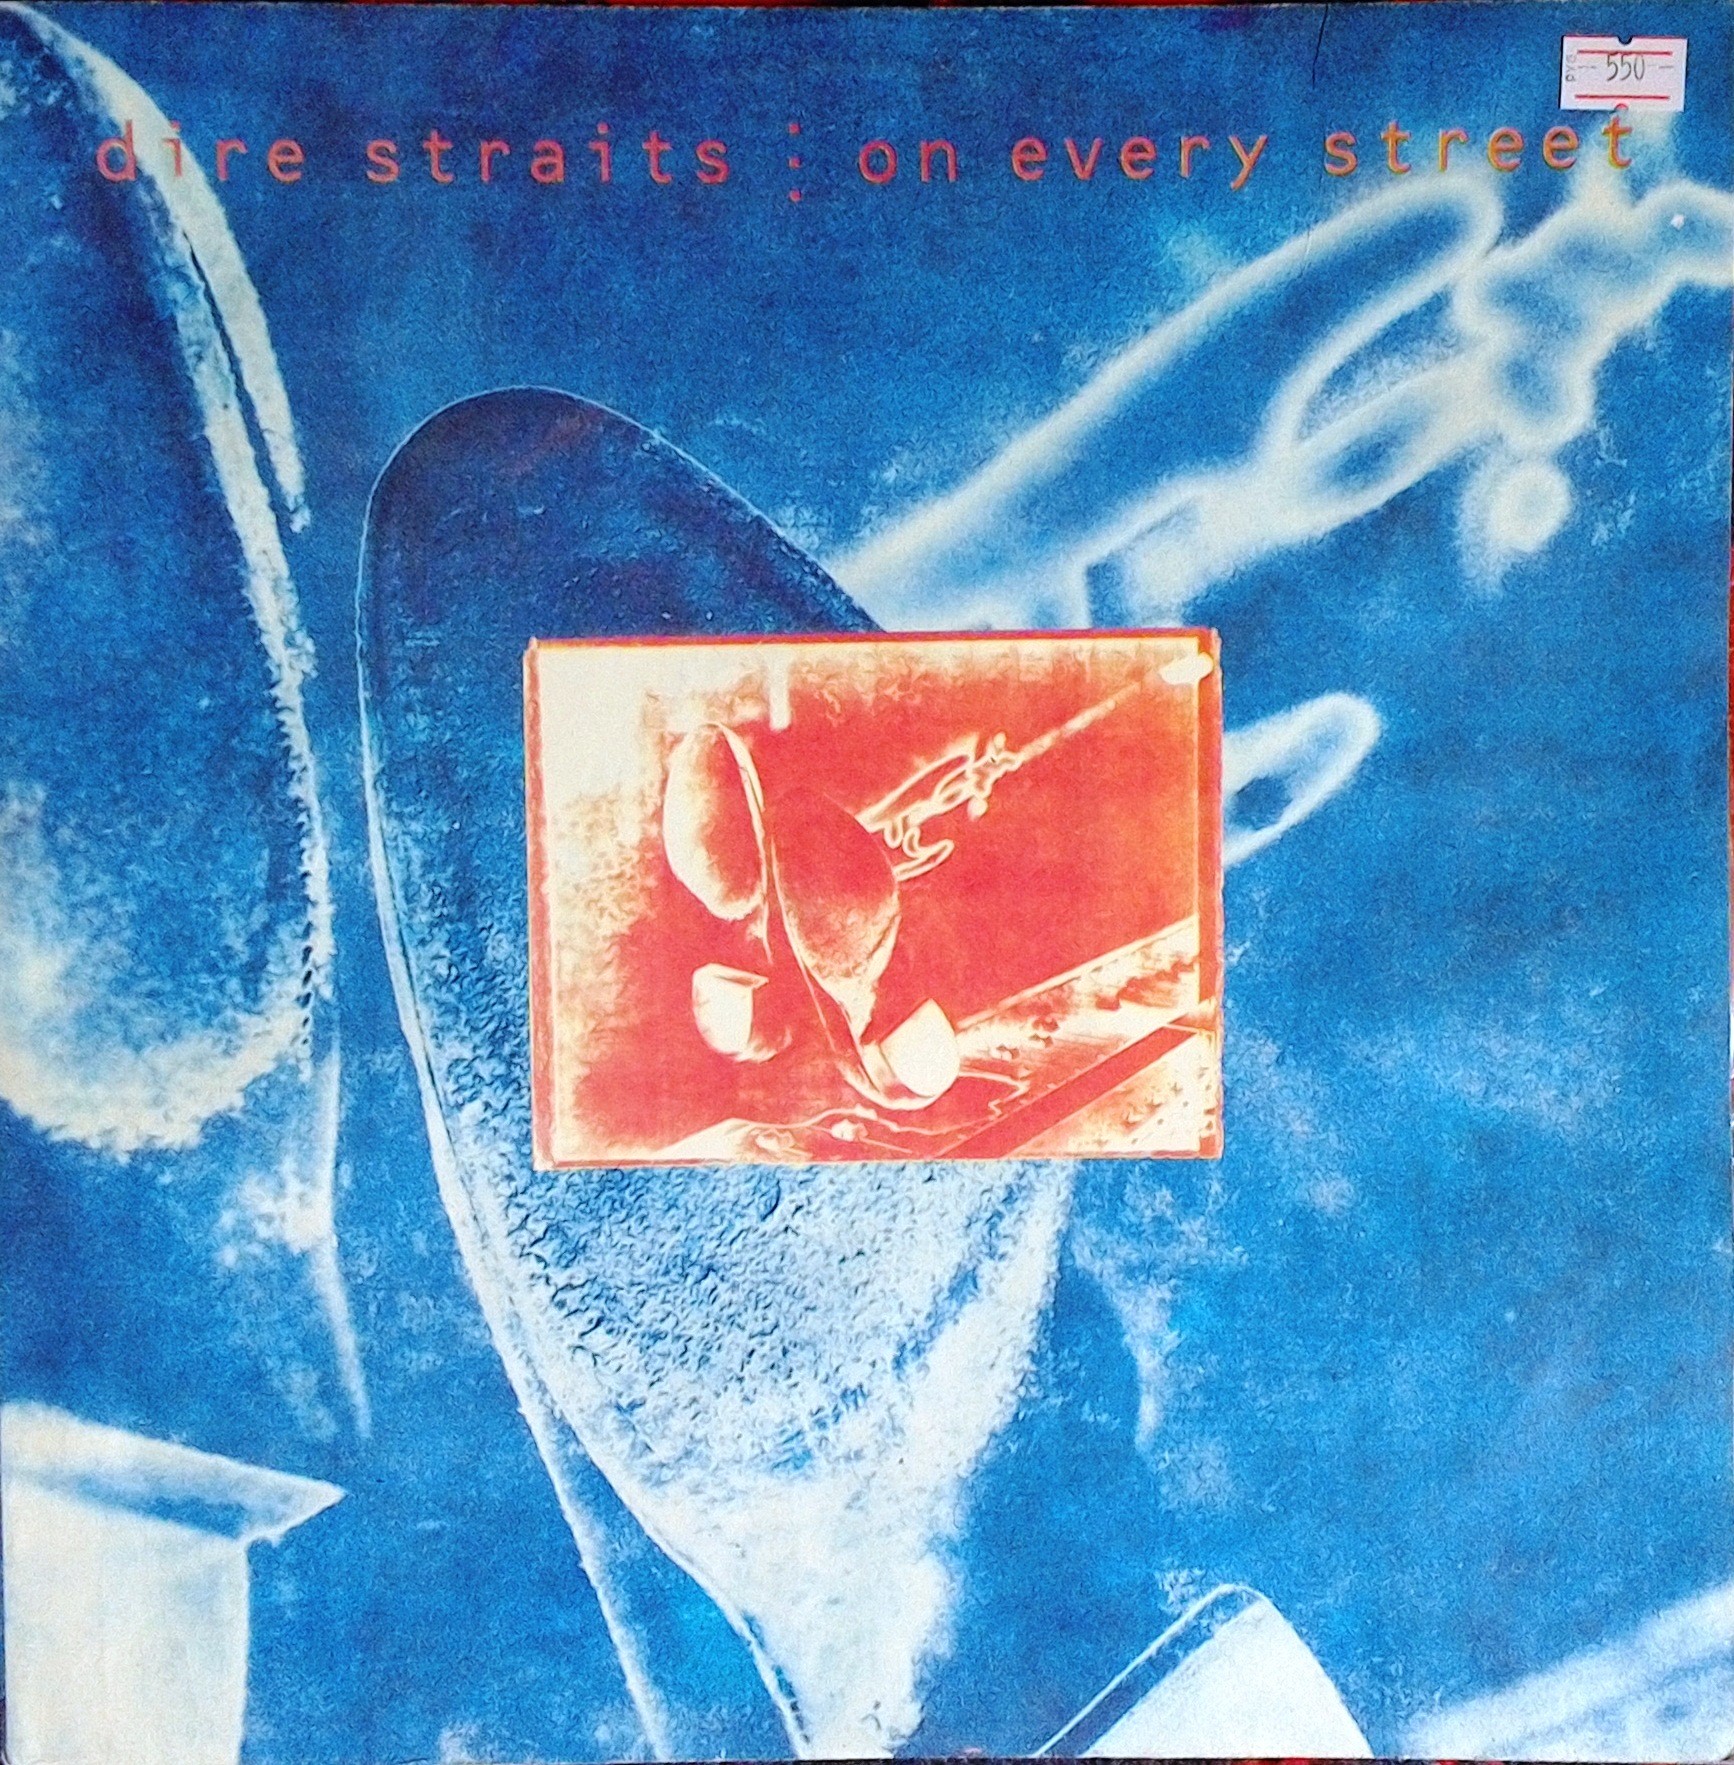 Dire Straits. On Every Street